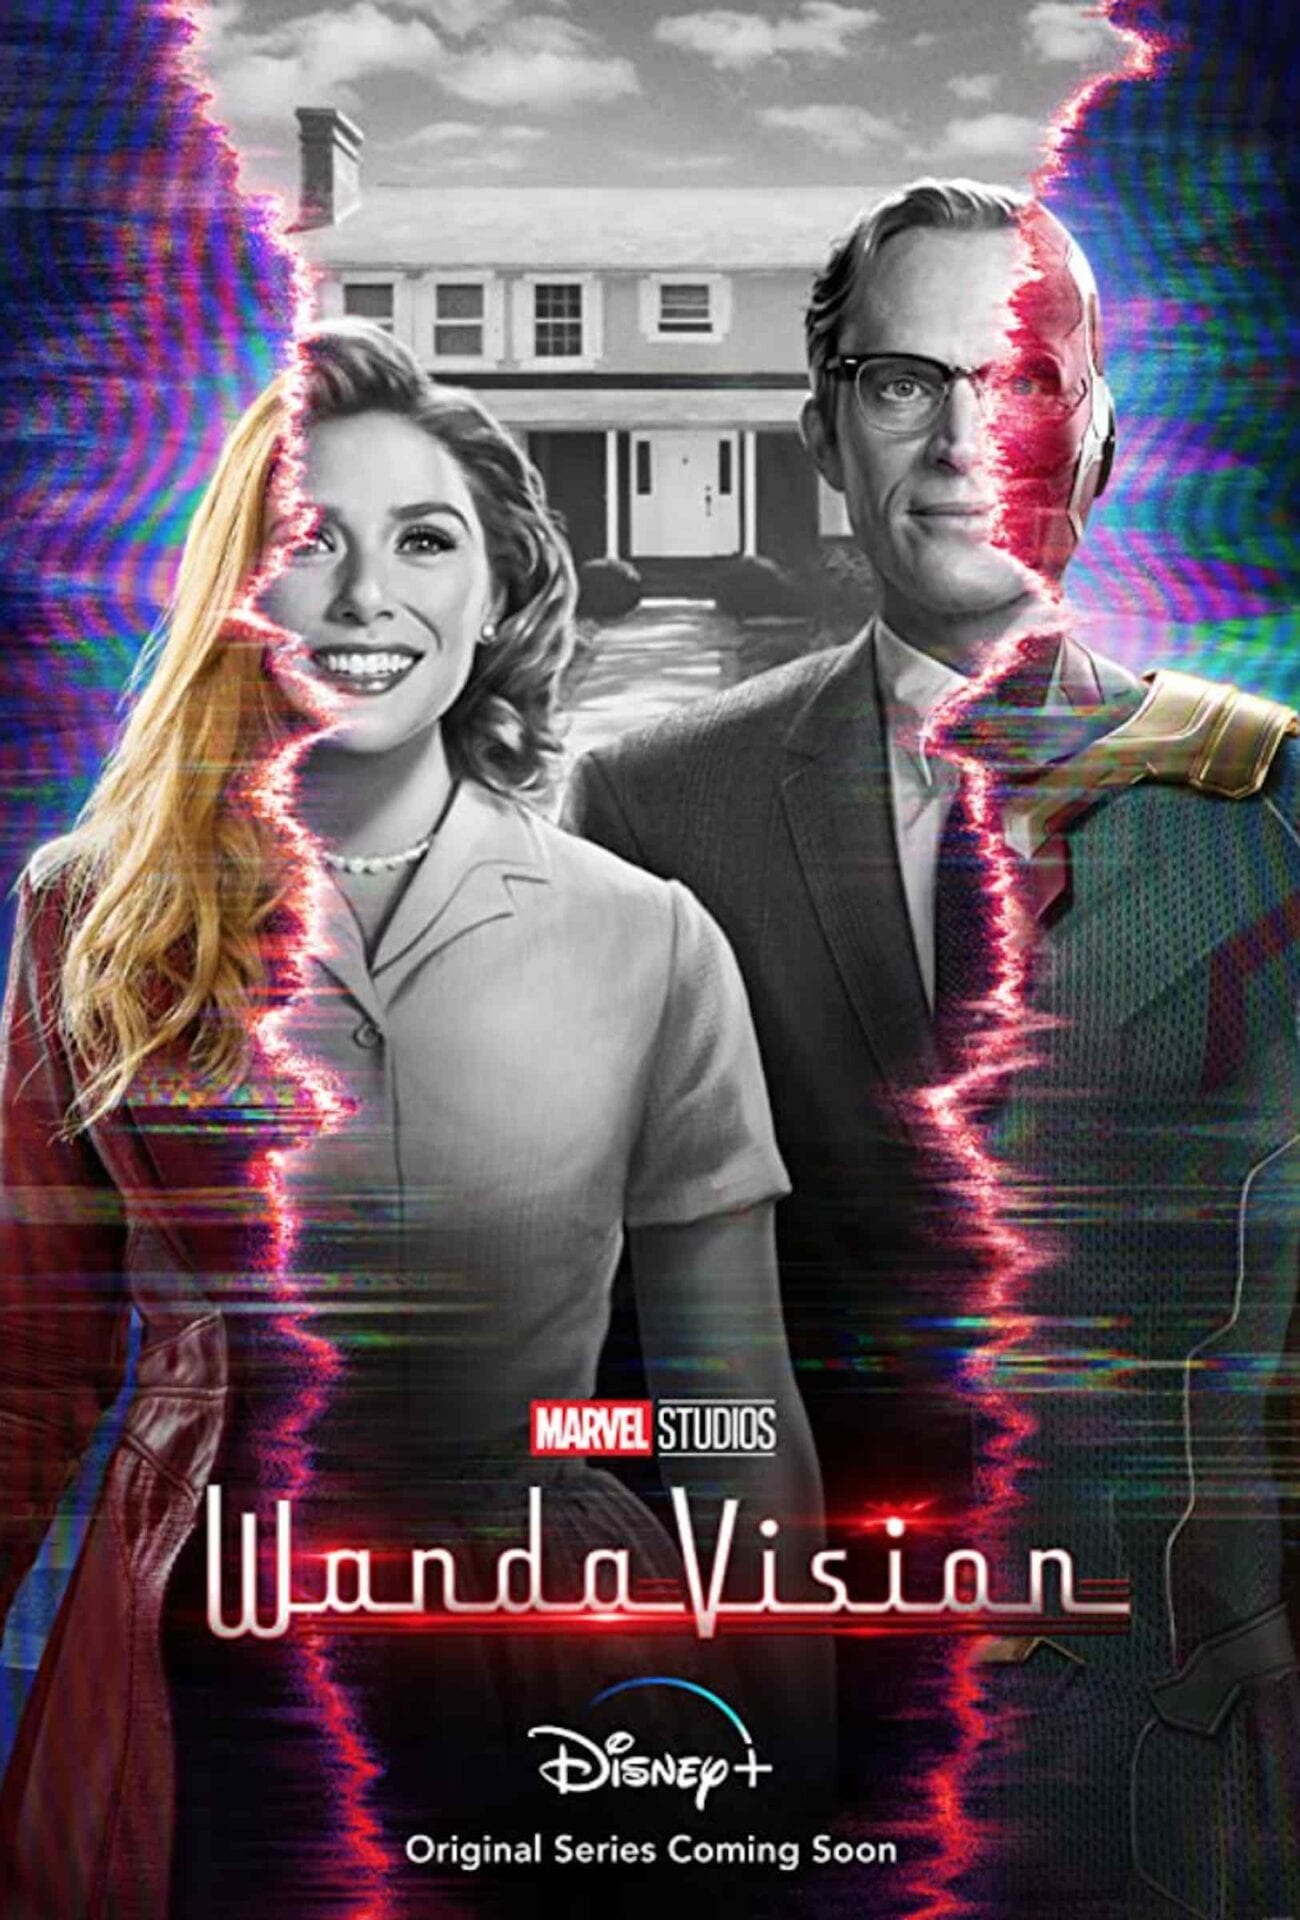 With the announcement of 'Loki' season 2, many are wondering if 'WandaVision' will also get renewed. Grab your Darkholds and dive into this question!